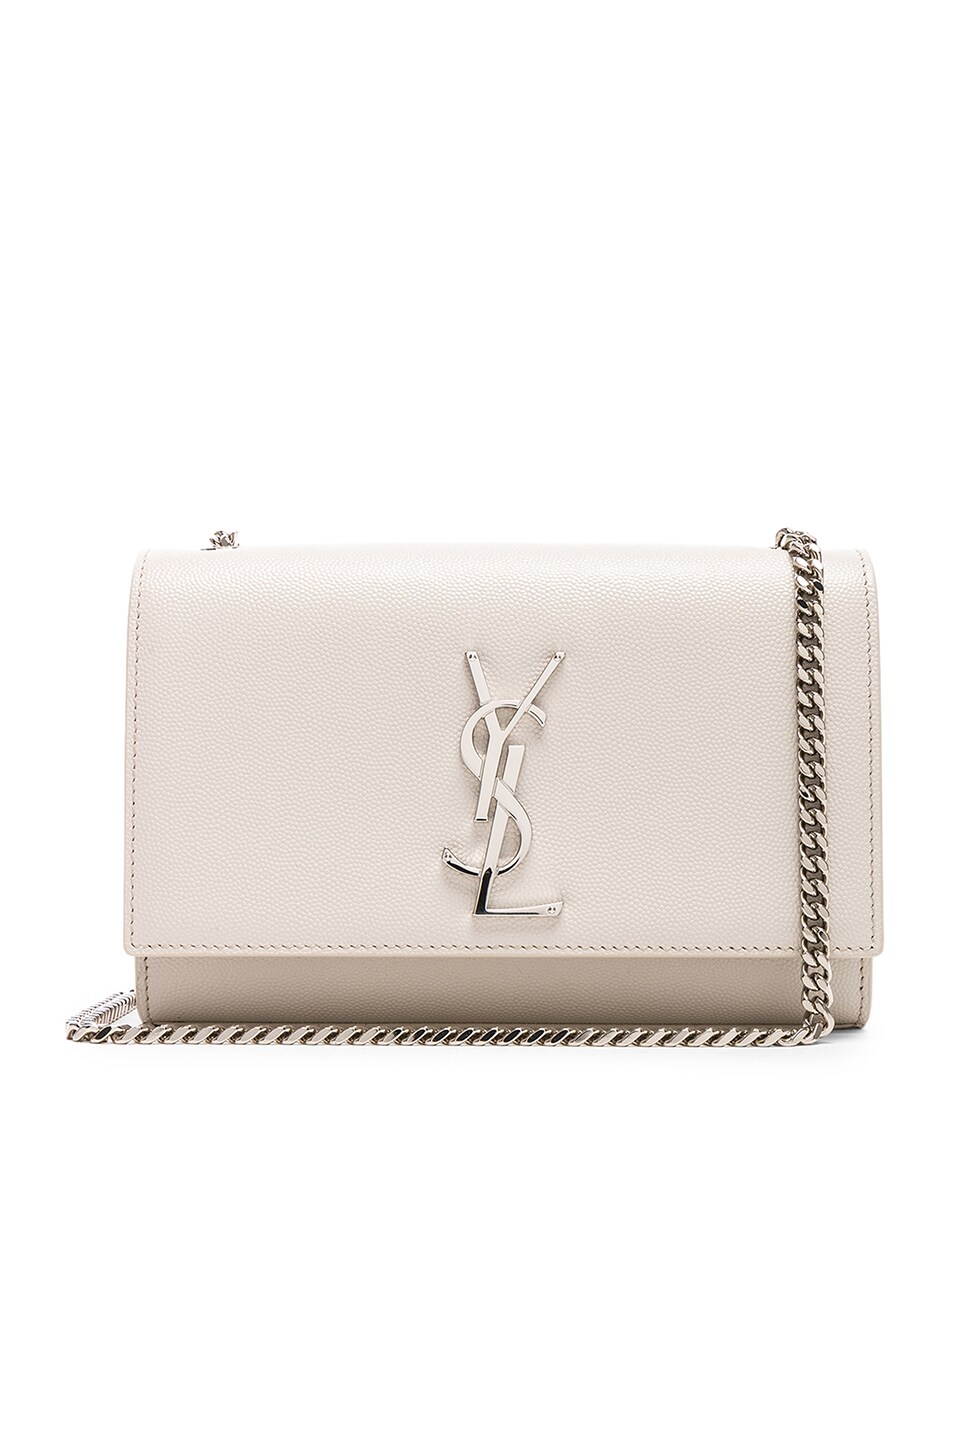 Image 1 of Saint Laurent Small Monogramme Kate Chain Bag in Icy White